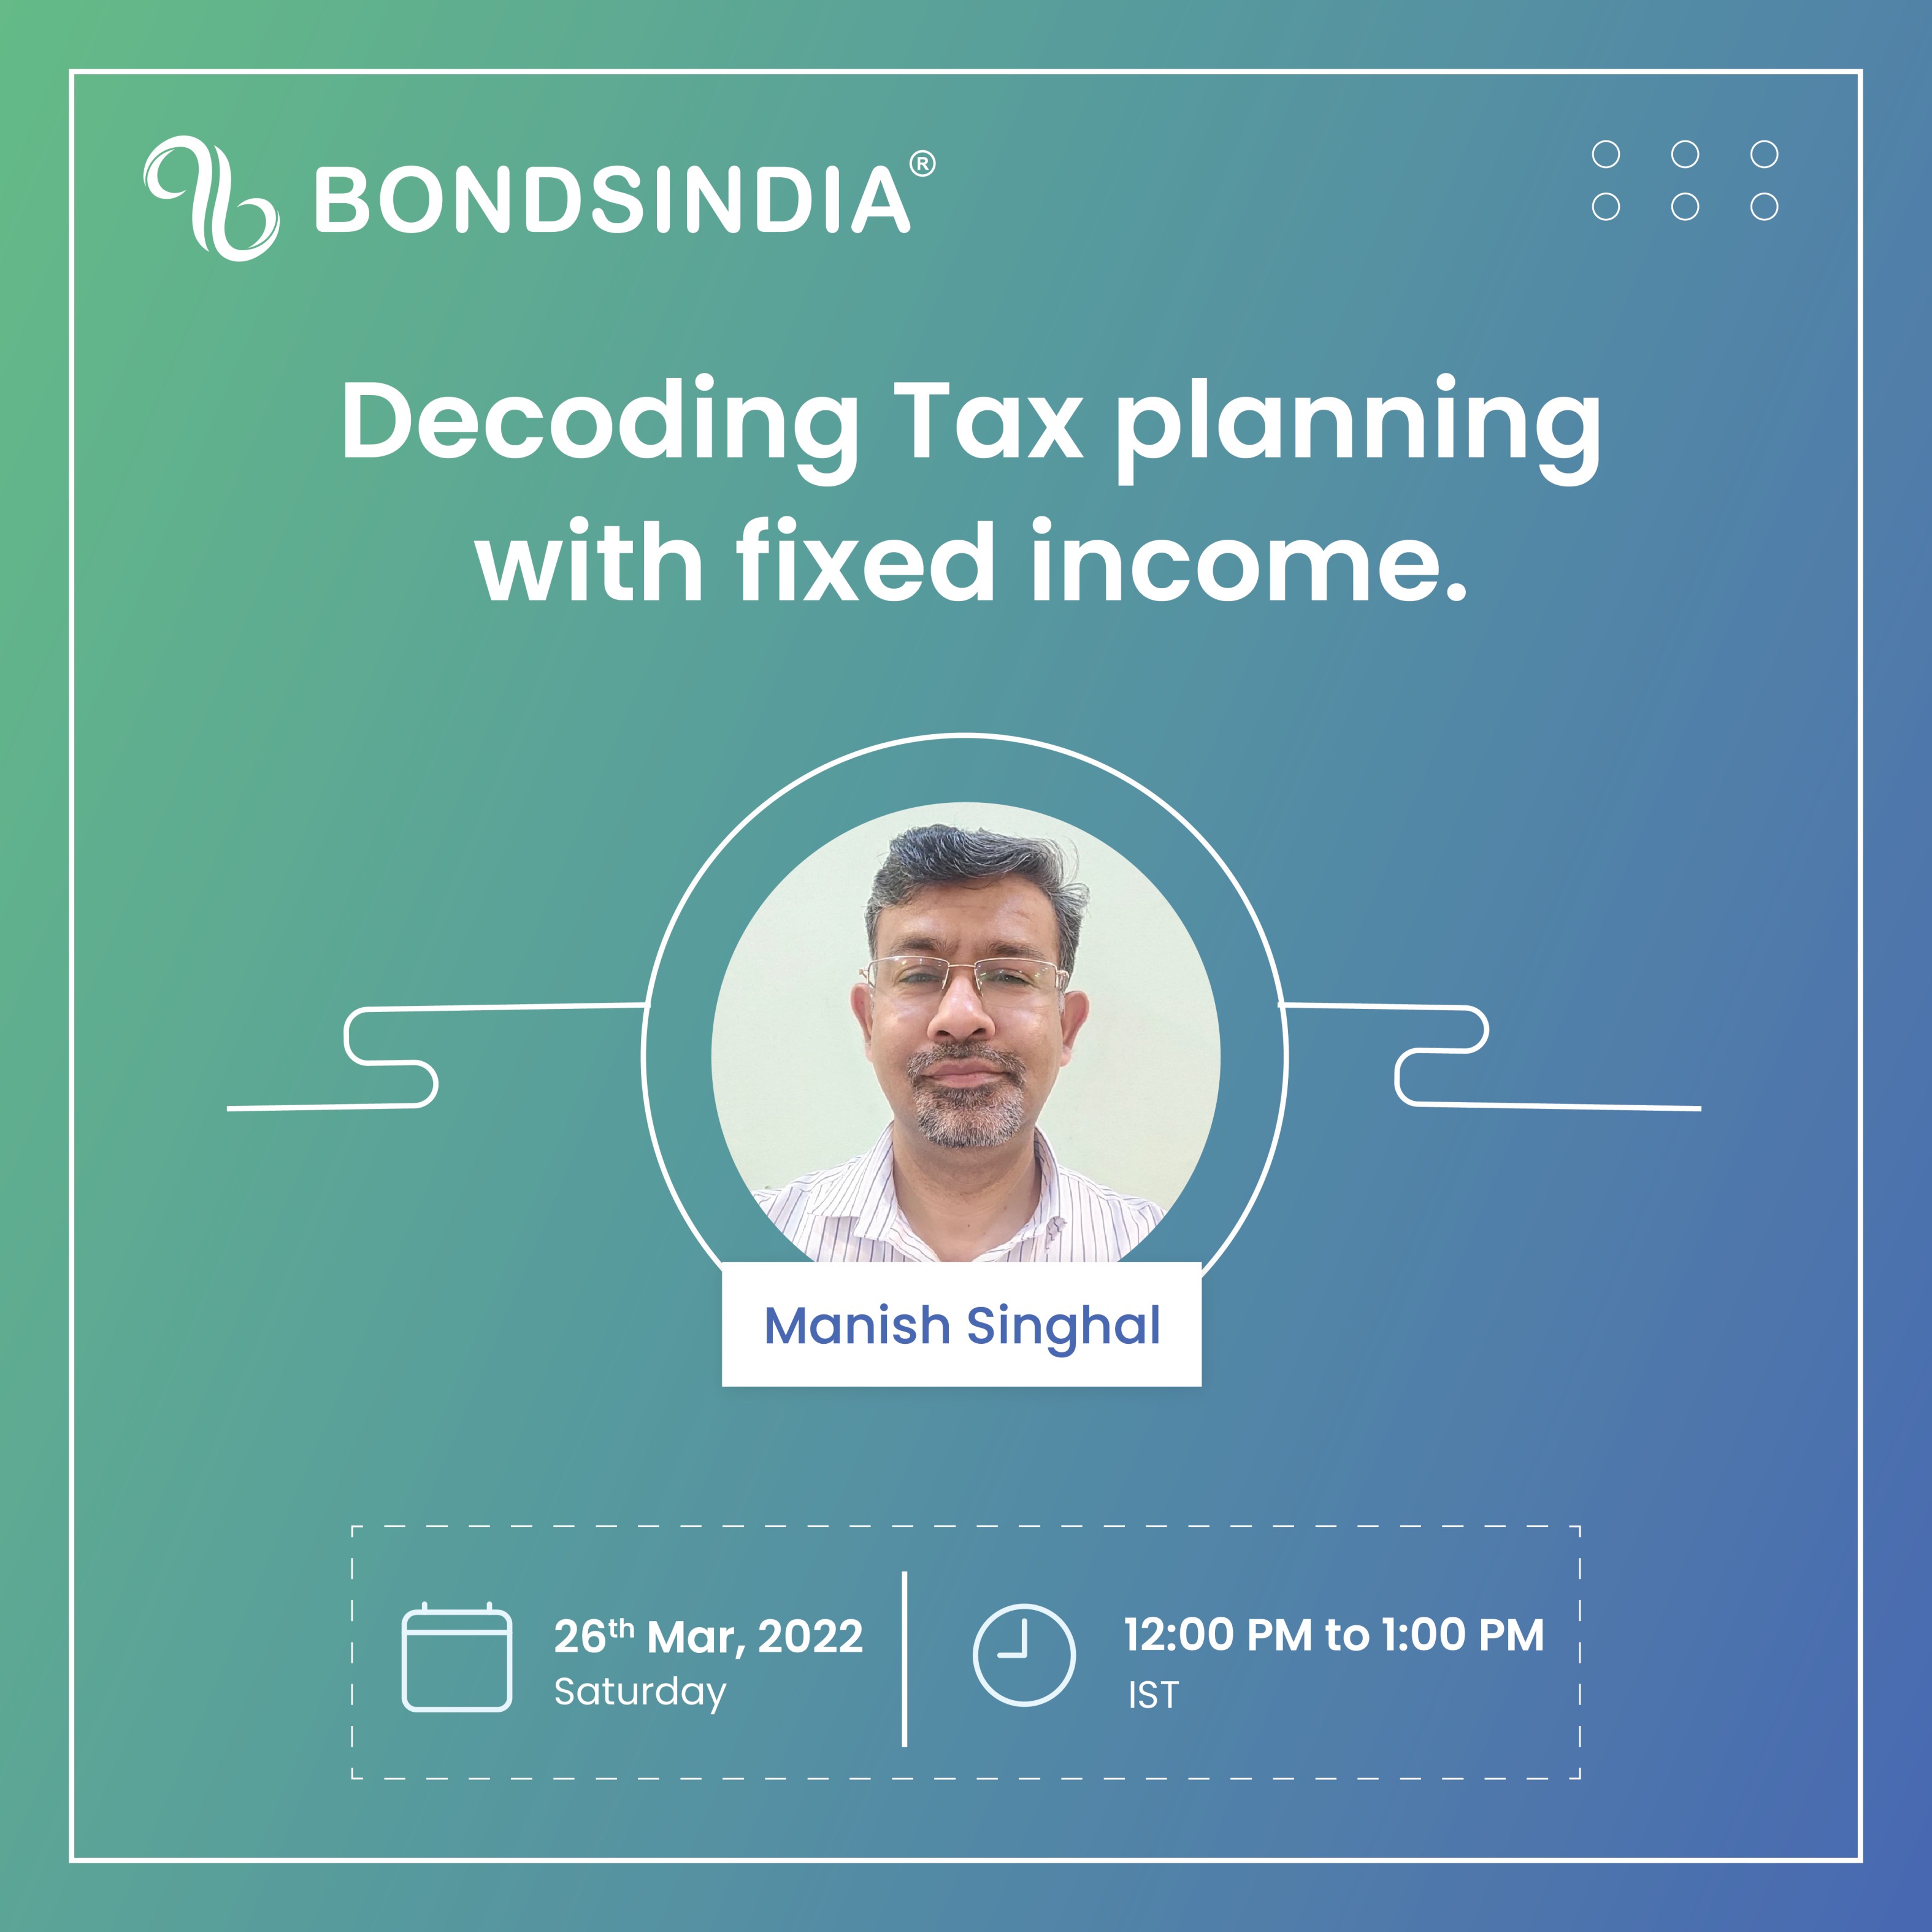 Decoding tax planning with the fixed income, Online Event